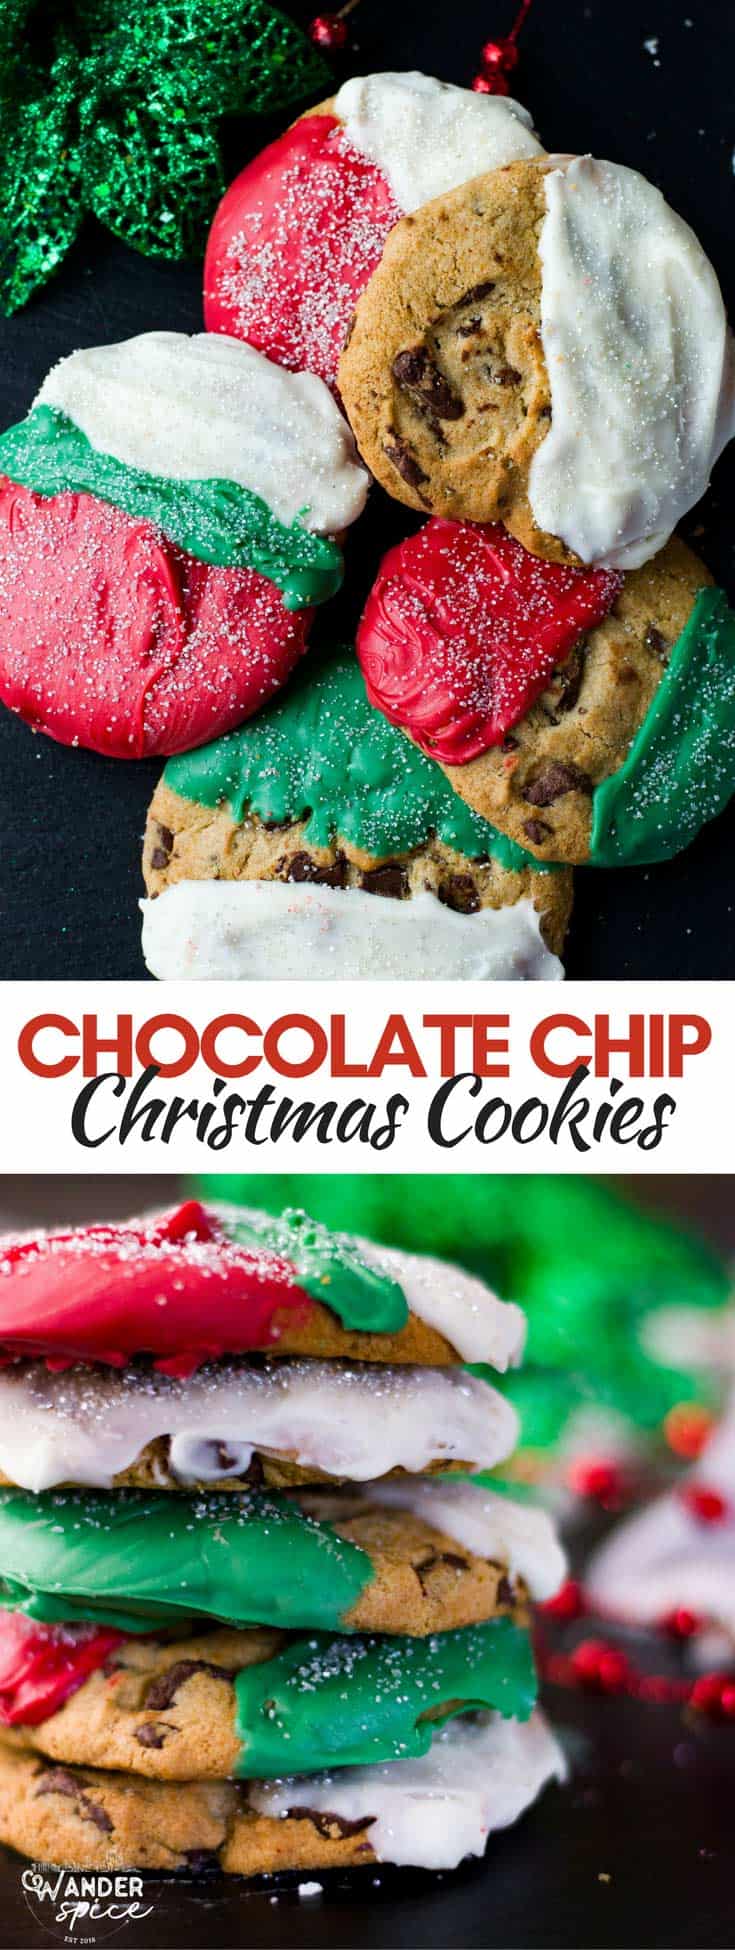 Decorated Christmas Chocolate Chip Cookies for the Holidays. Easy Recipe.